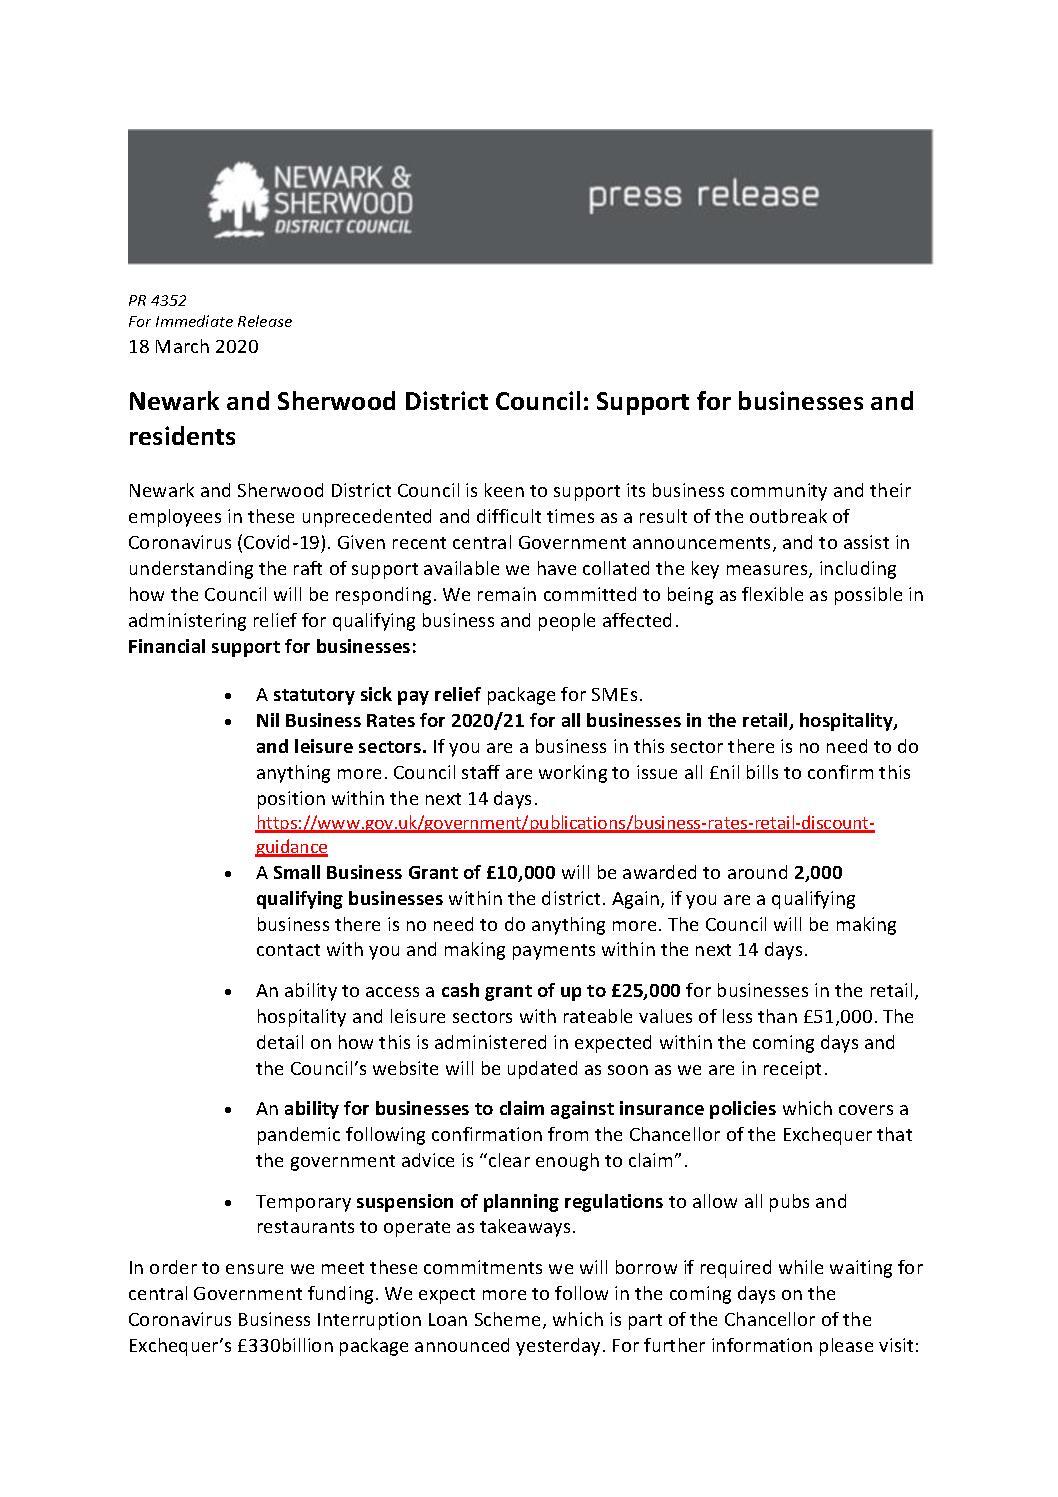 NSDC - Support for Businesses and Residents during the Coronavirus outbreak